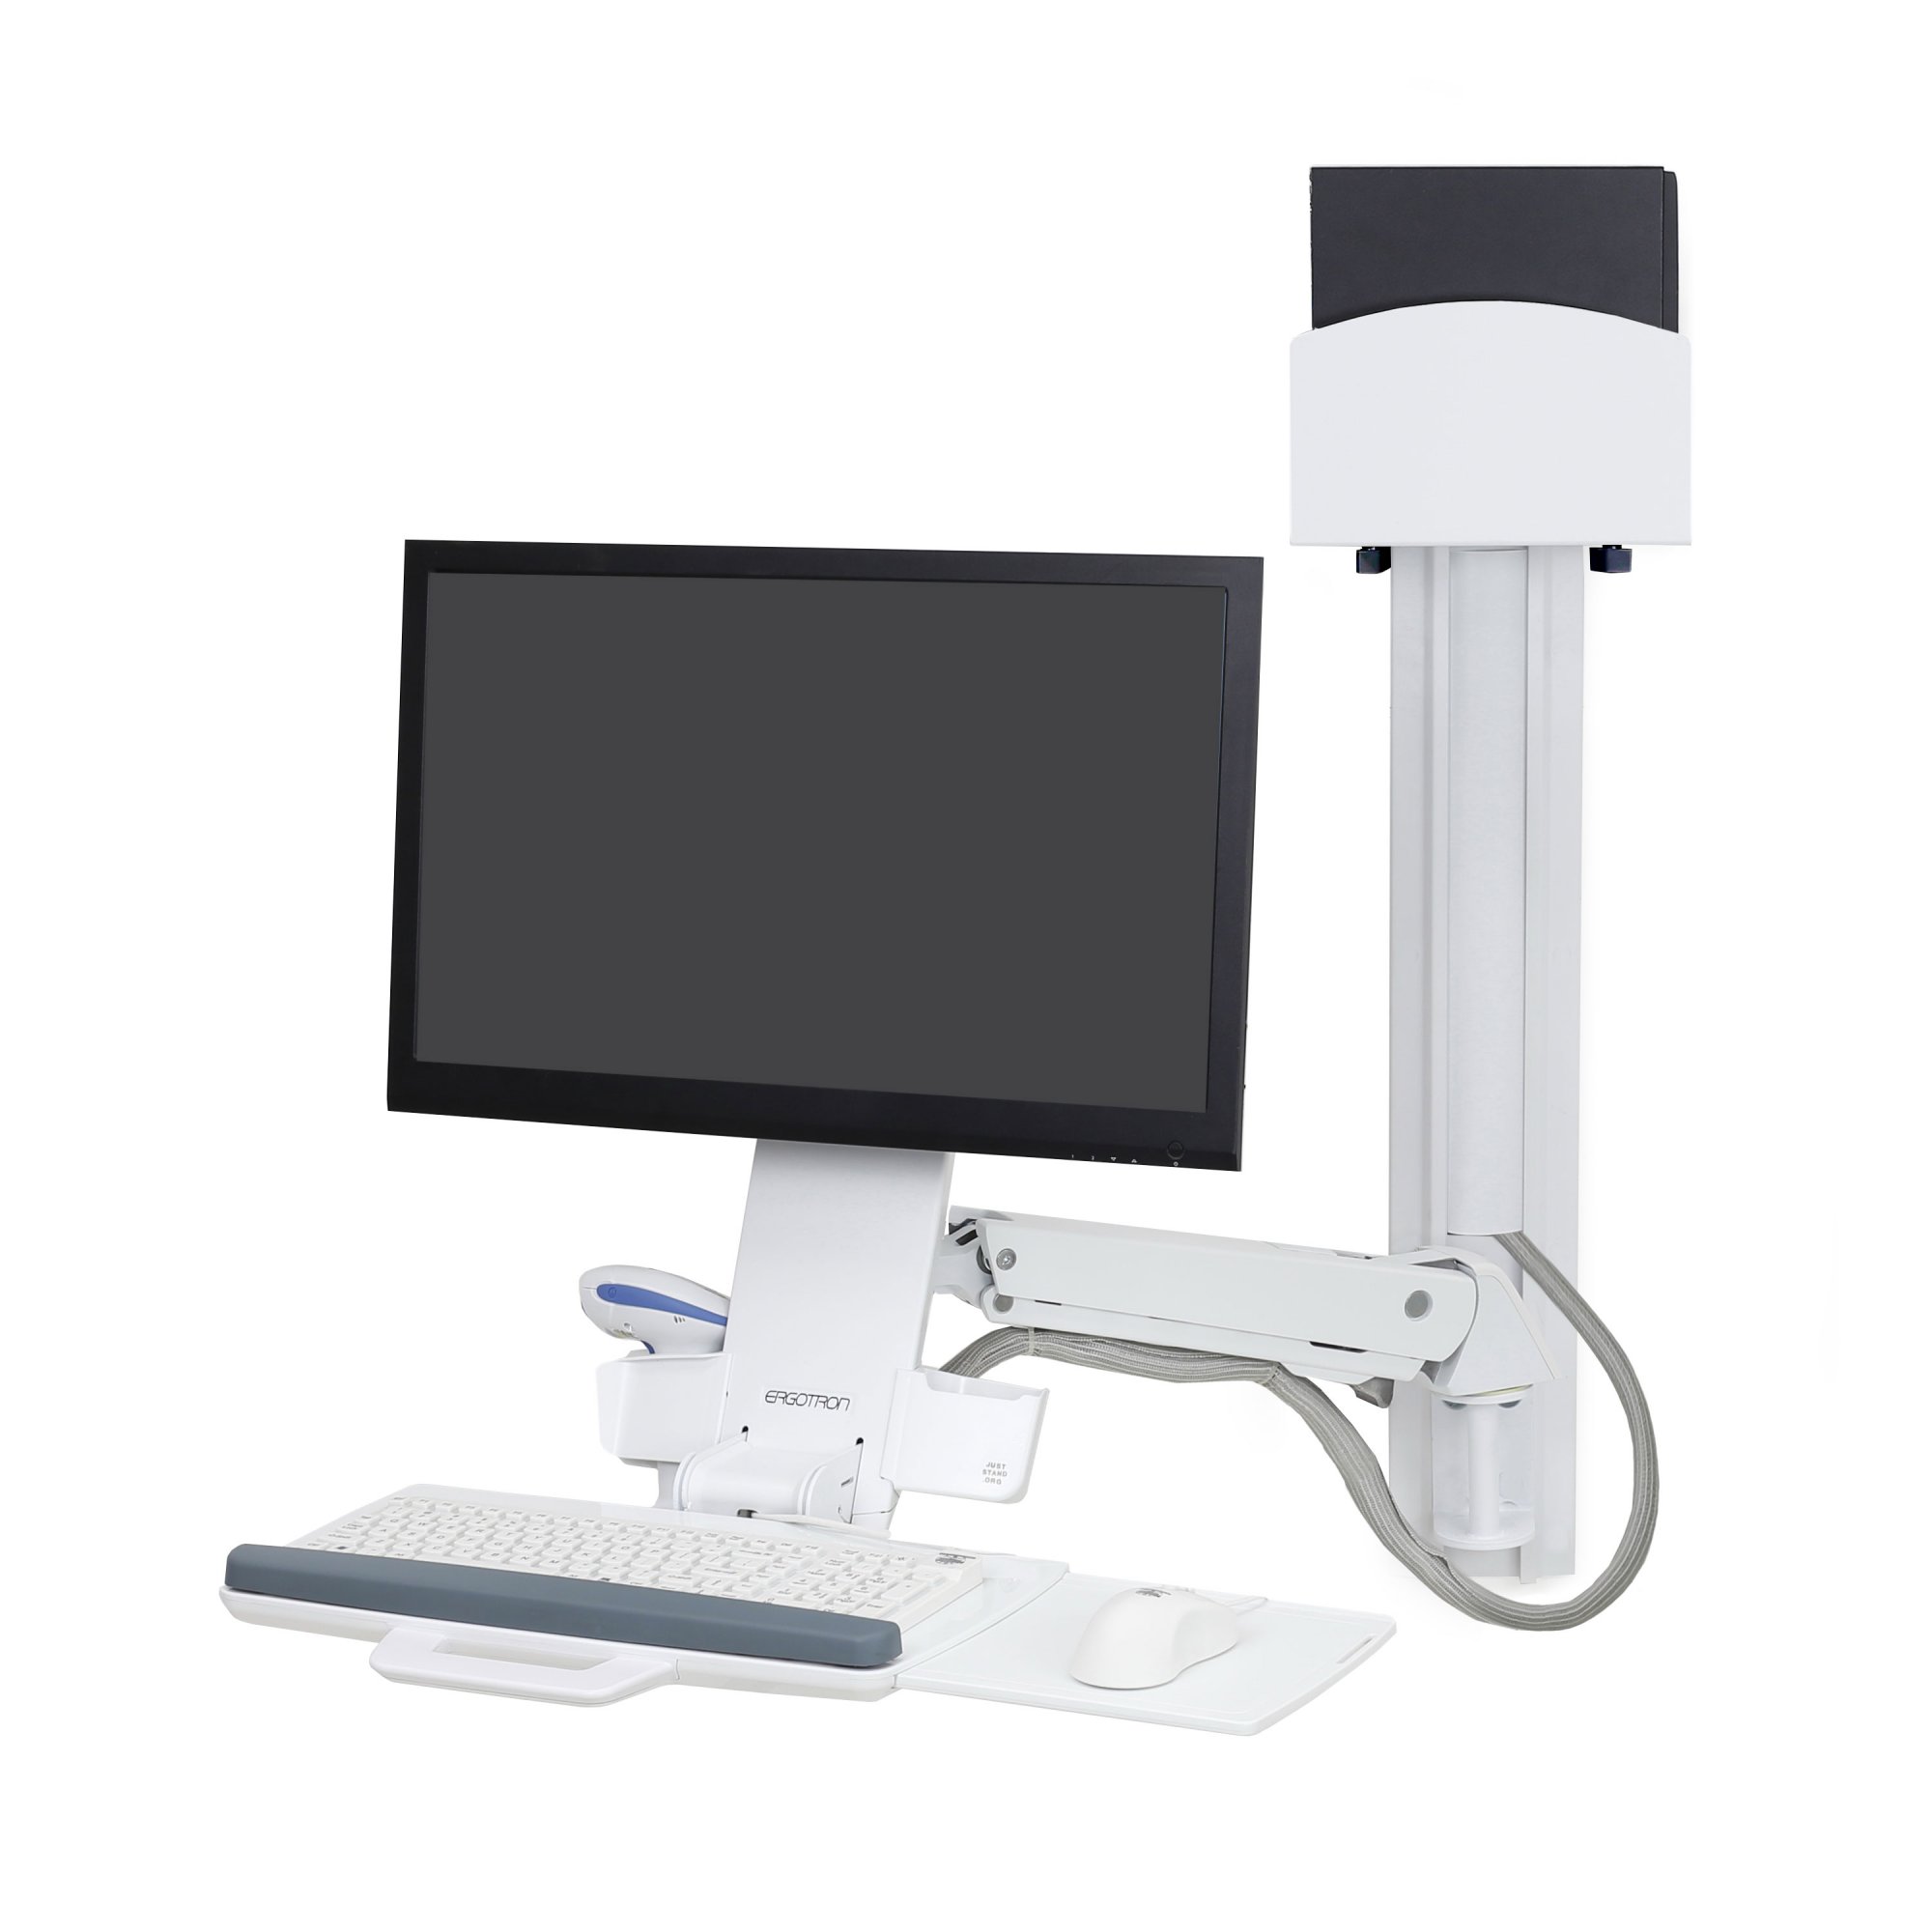 Ergotron 45-271-216 StyleView Sit-Stand Combo System (white)